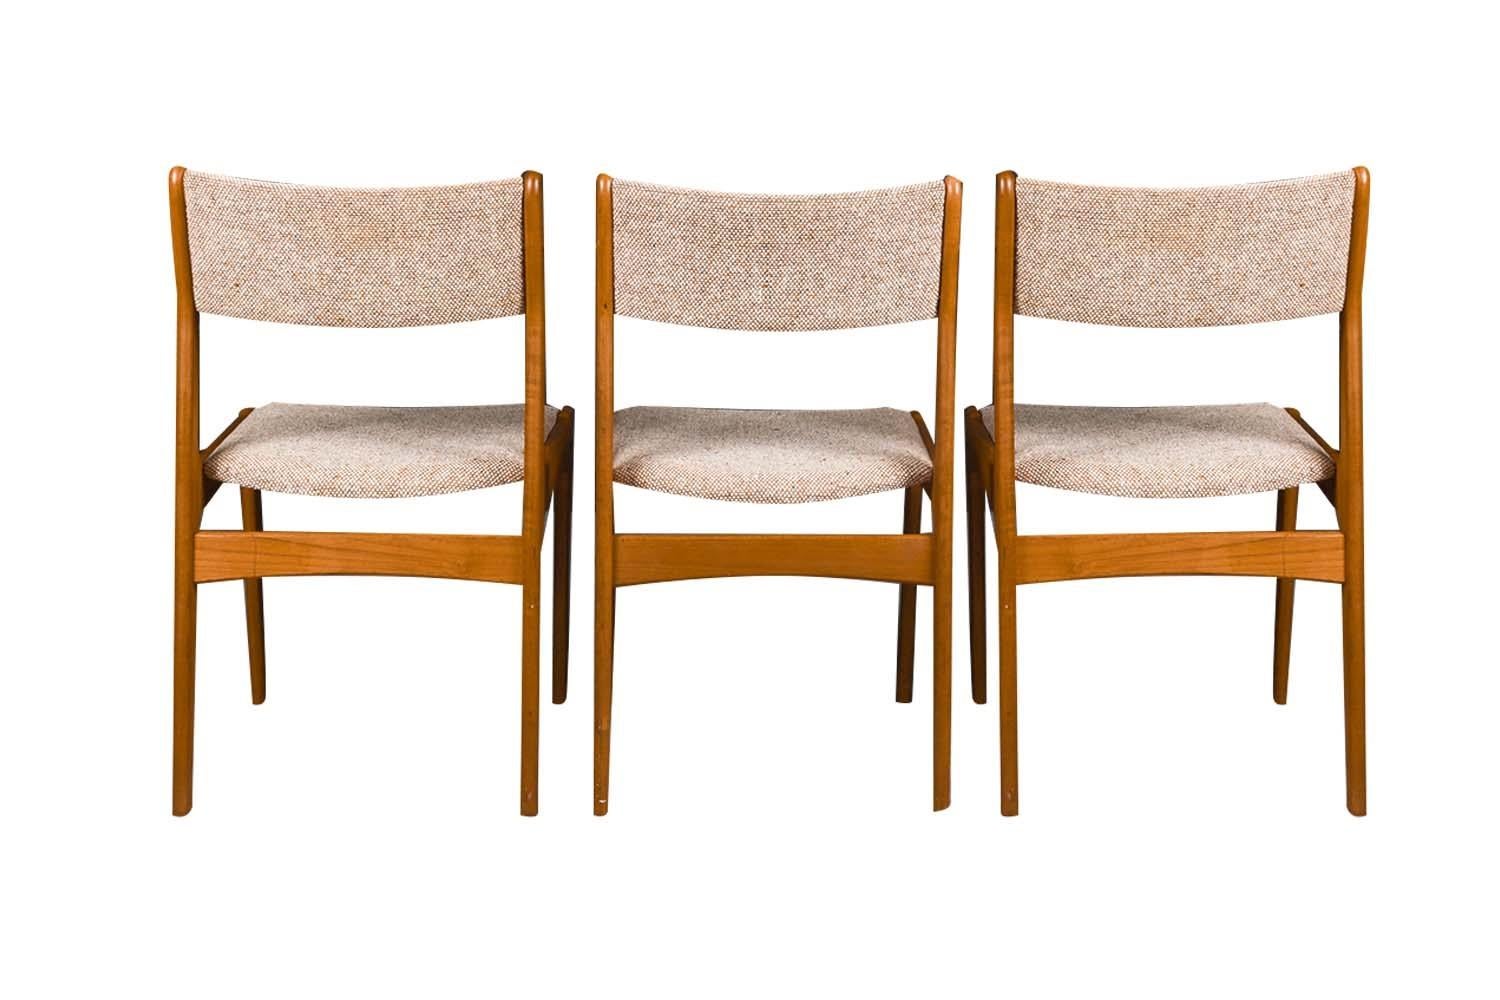 Mid-Century Modern Midcentury Teak Dining Chairs Scandinavia Woodworks Co. For Sale